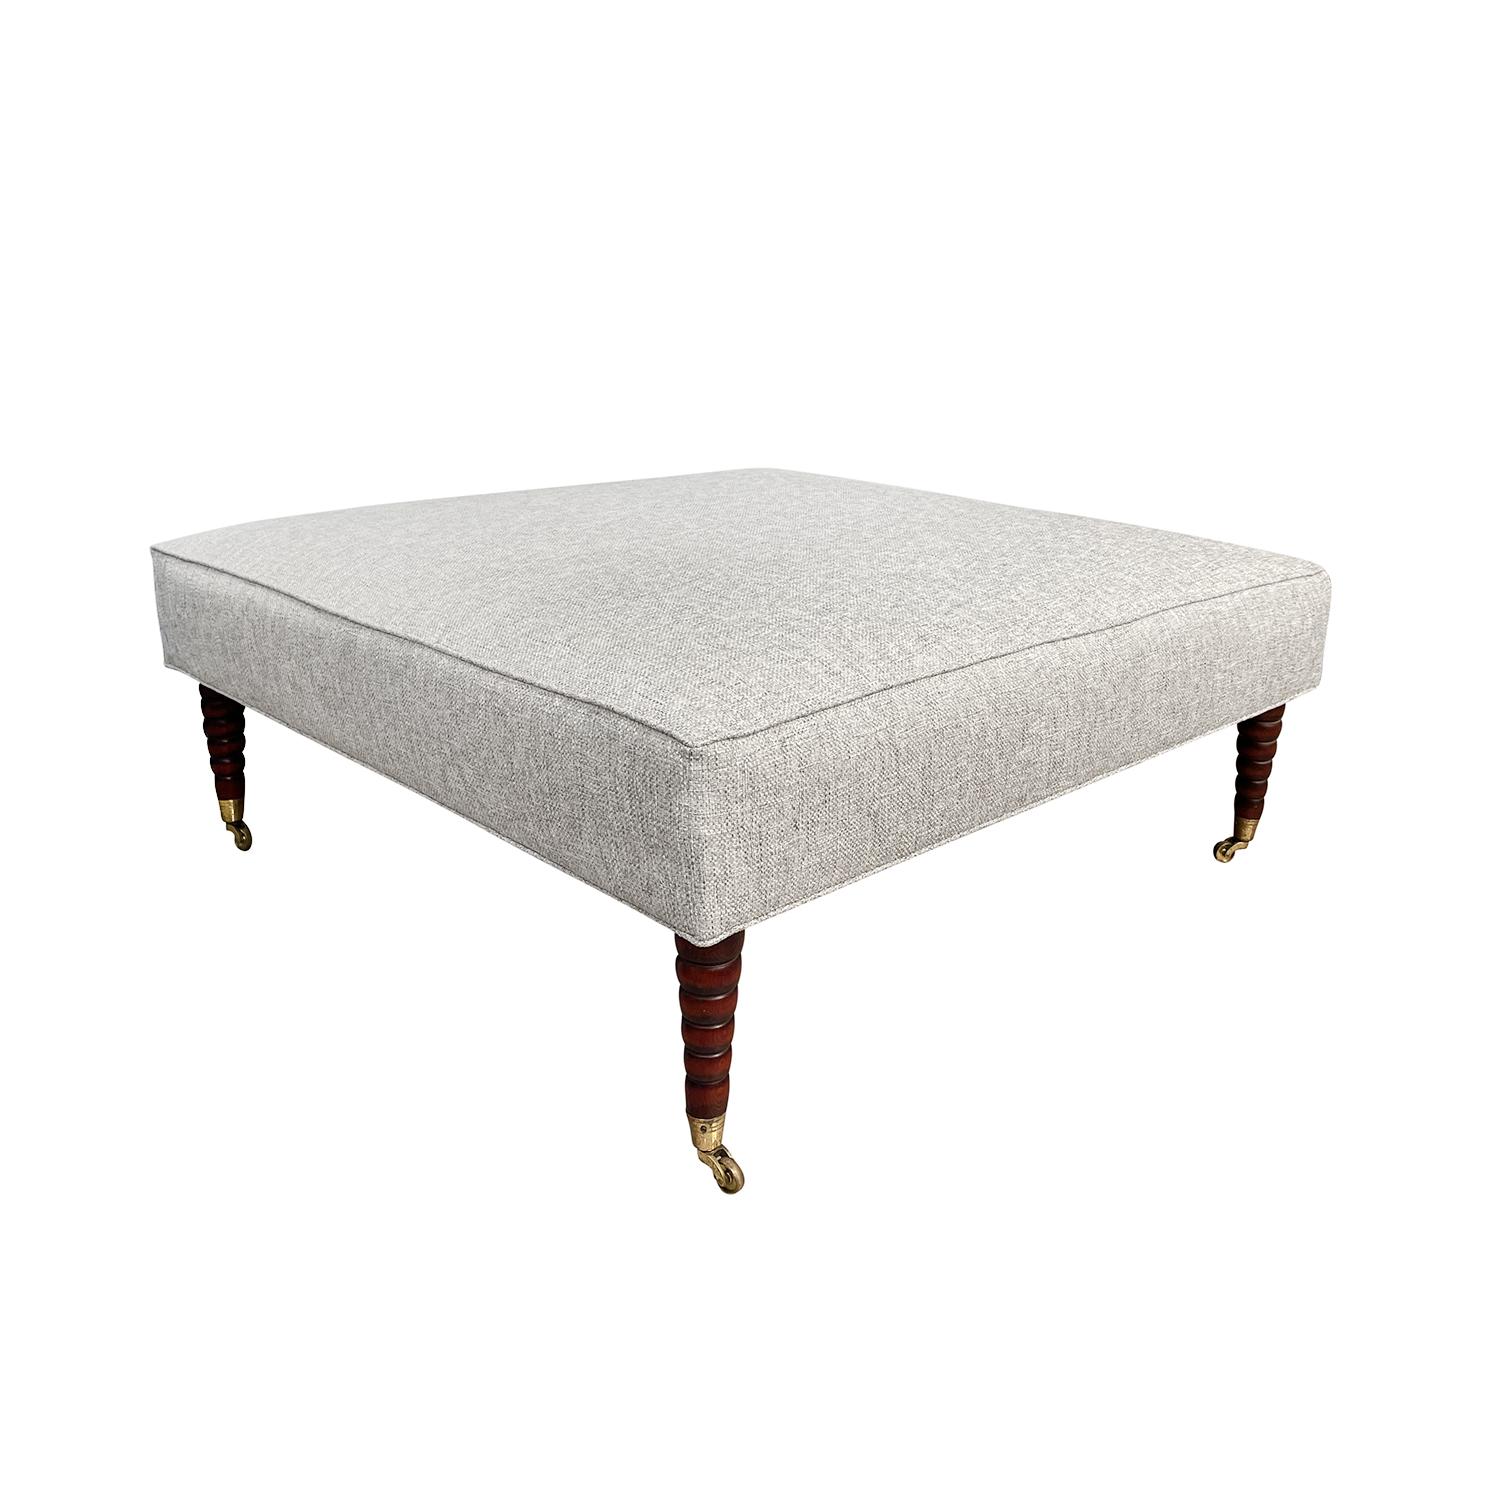 Hand-Crafted 20th Century Grey Italian Vintage Walnut Ottoman, Large Square Sofa Bench For Sale